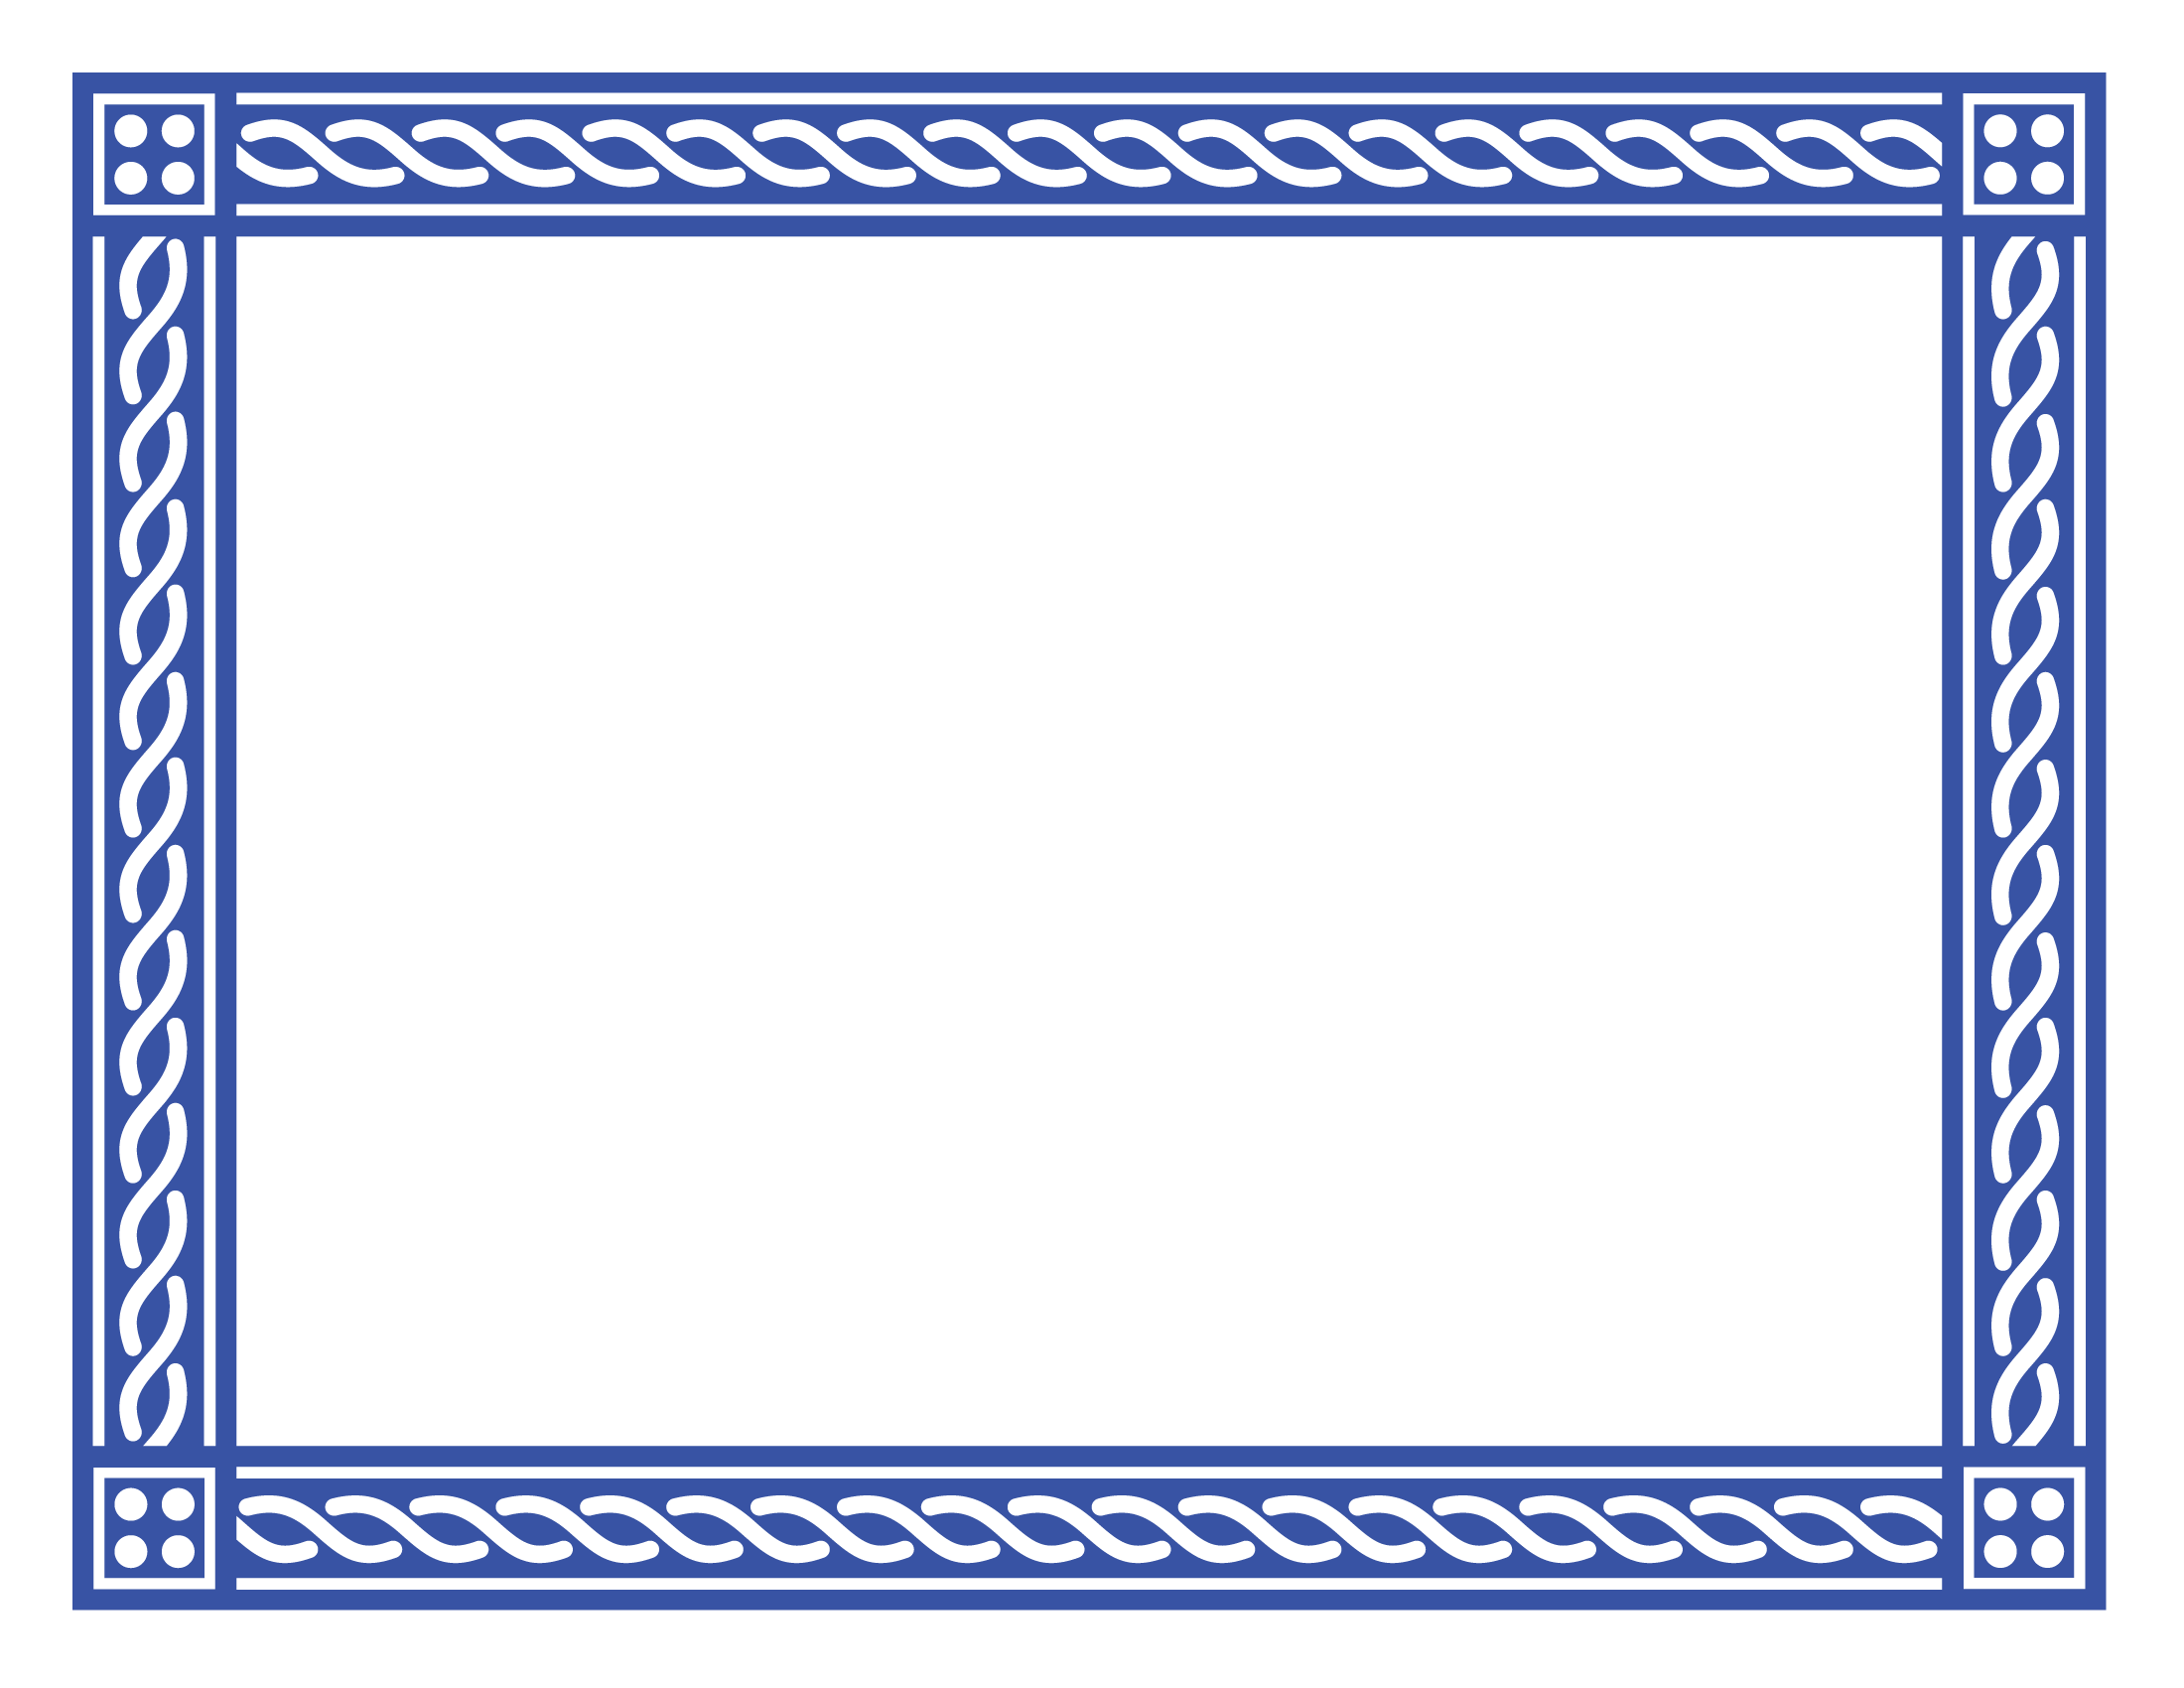 Png Certificate Borders Free - Certificate Border 2 Blue Png.png (2200×1700), Transparent background PNG HD thumbnail